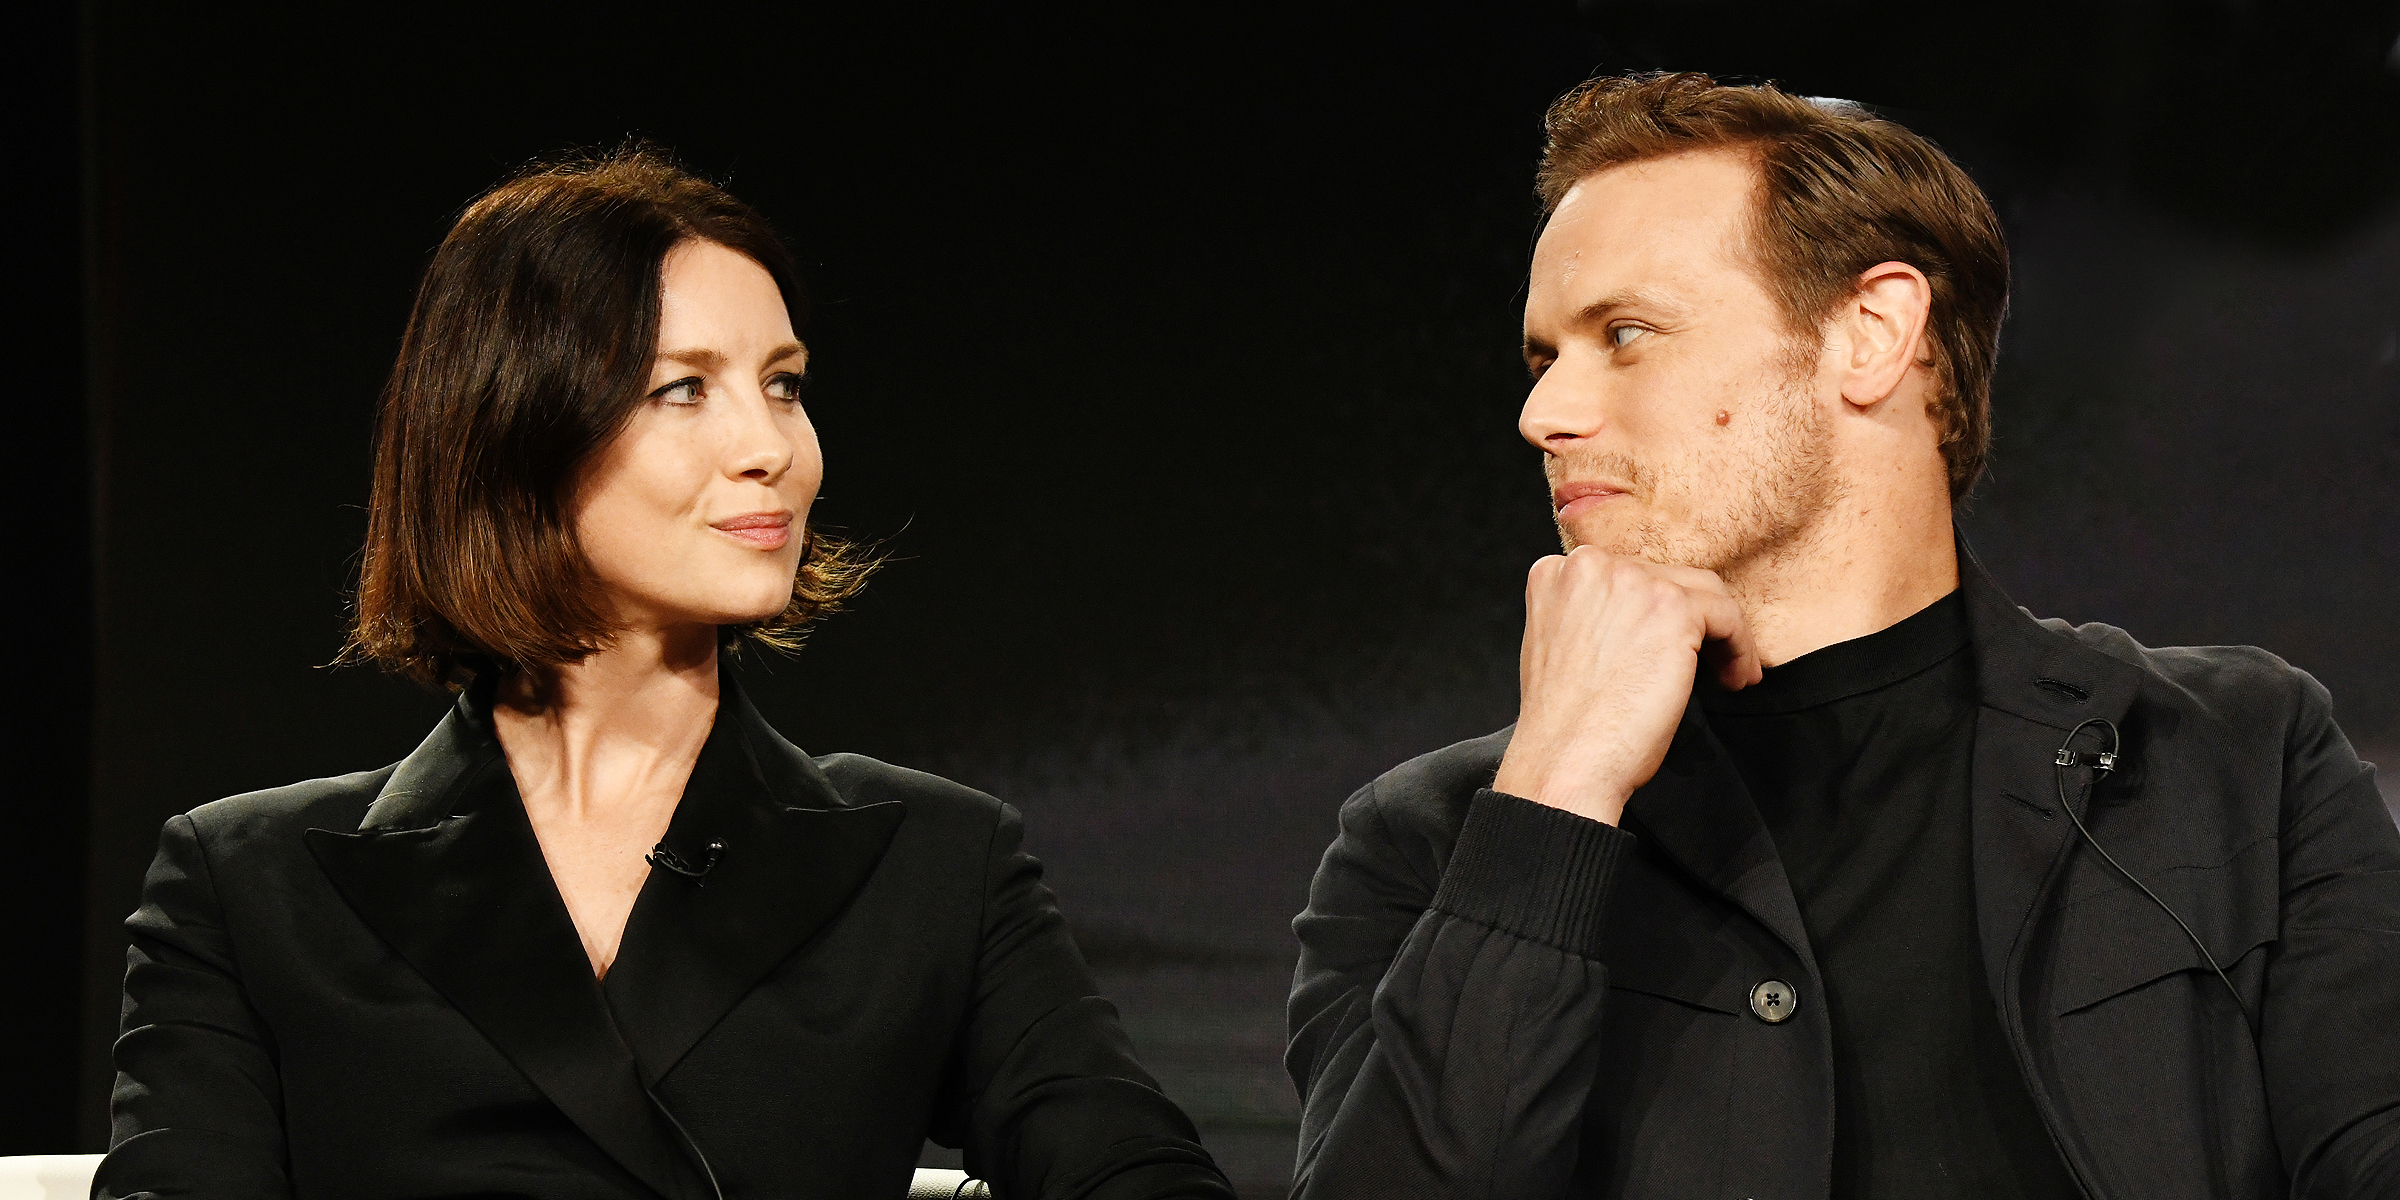 Caitriona Balfe and Sam Heughan | Source: Getty Images